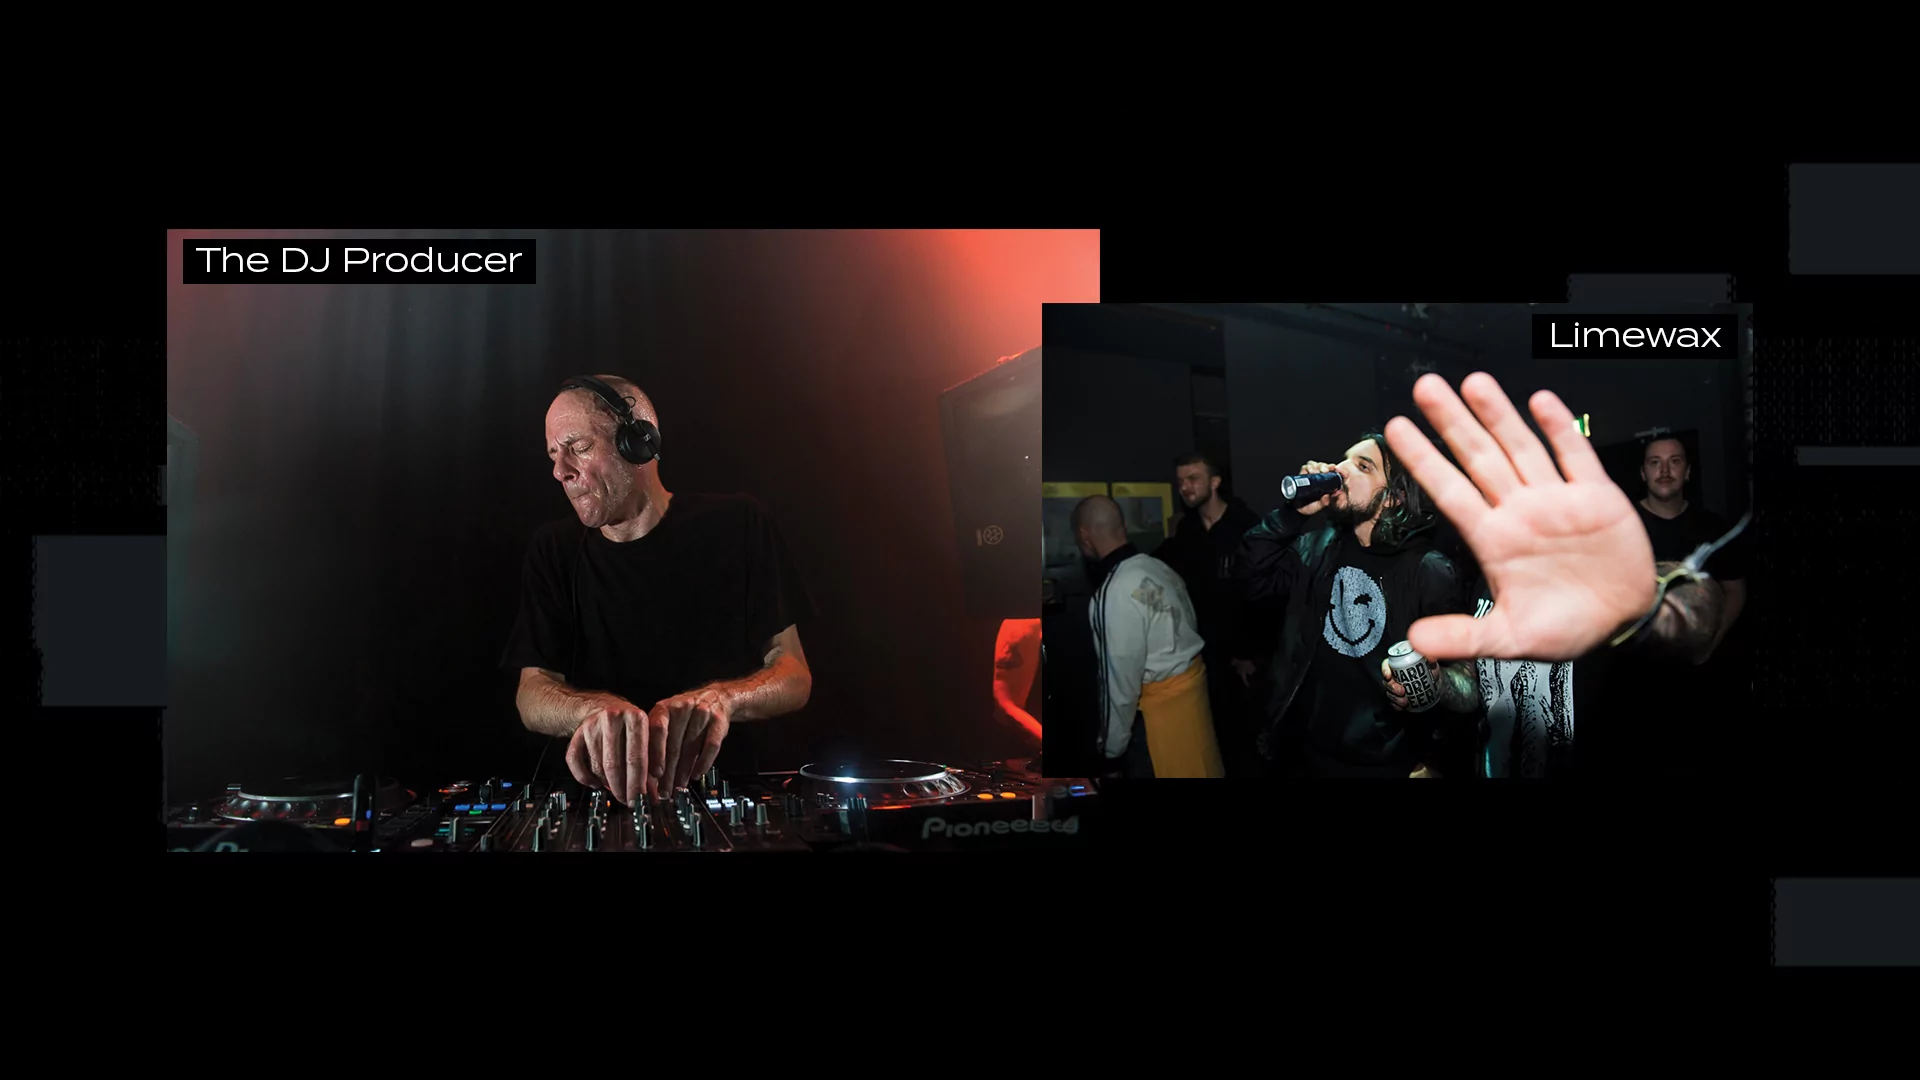 Two photos on a black background, one of The DJ Producer DJing at a PRSPCT party, another of Limewax drinking a beer at an event while another person holds their hand to the camera